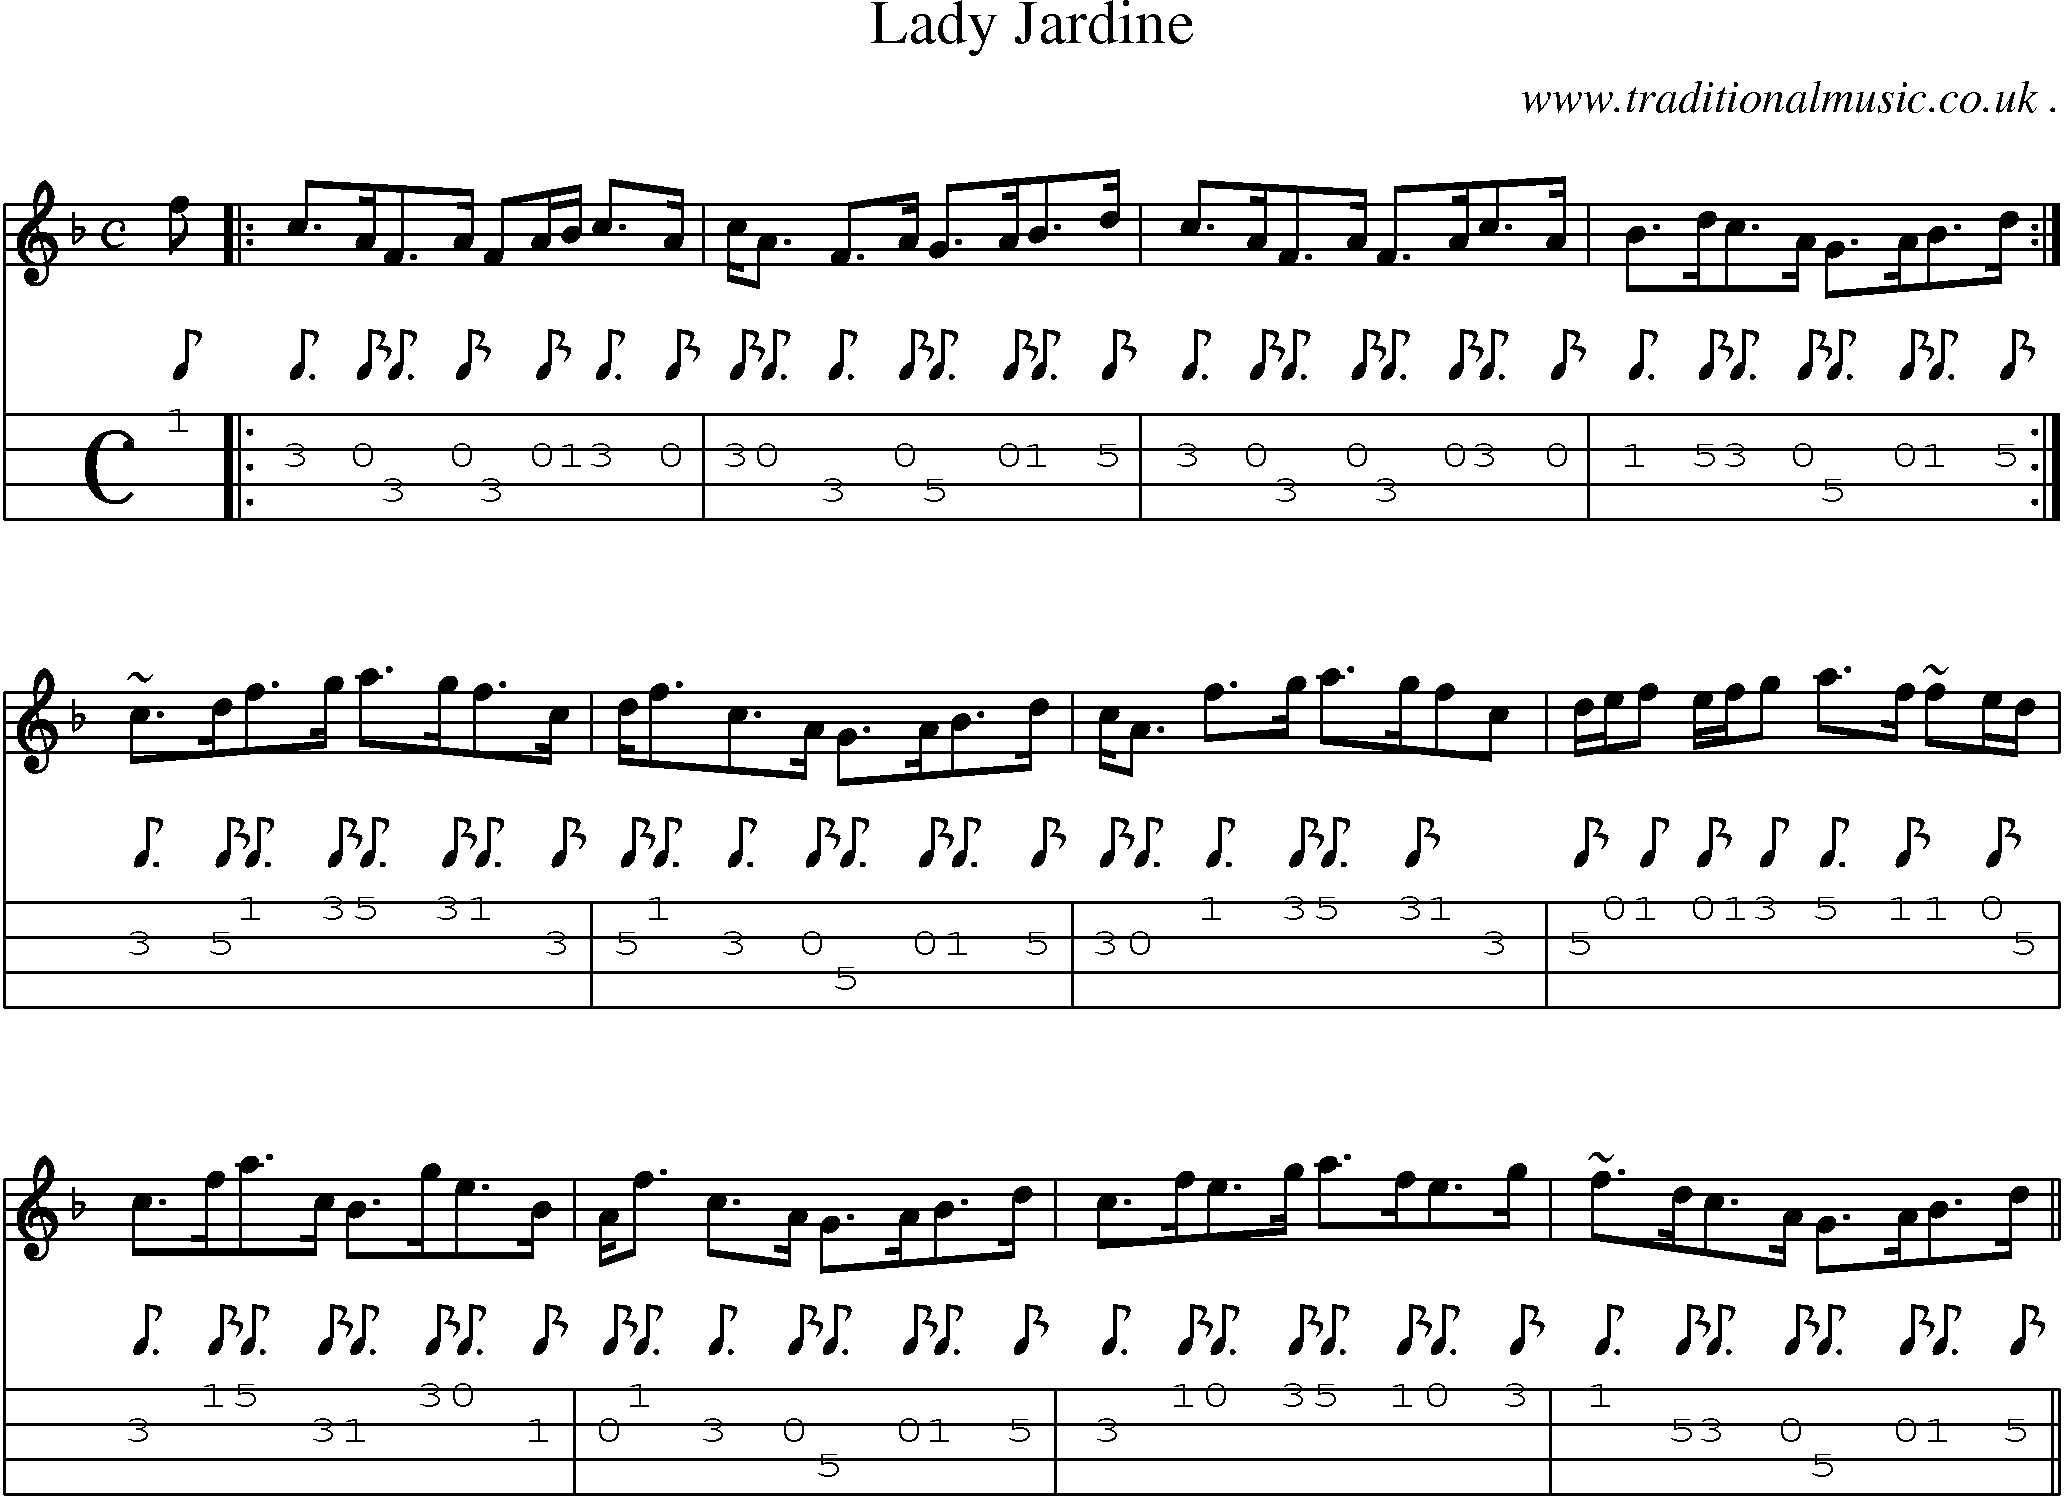 Sheet-music  score, Chords and Mandolin Tabs for Lady Jardine